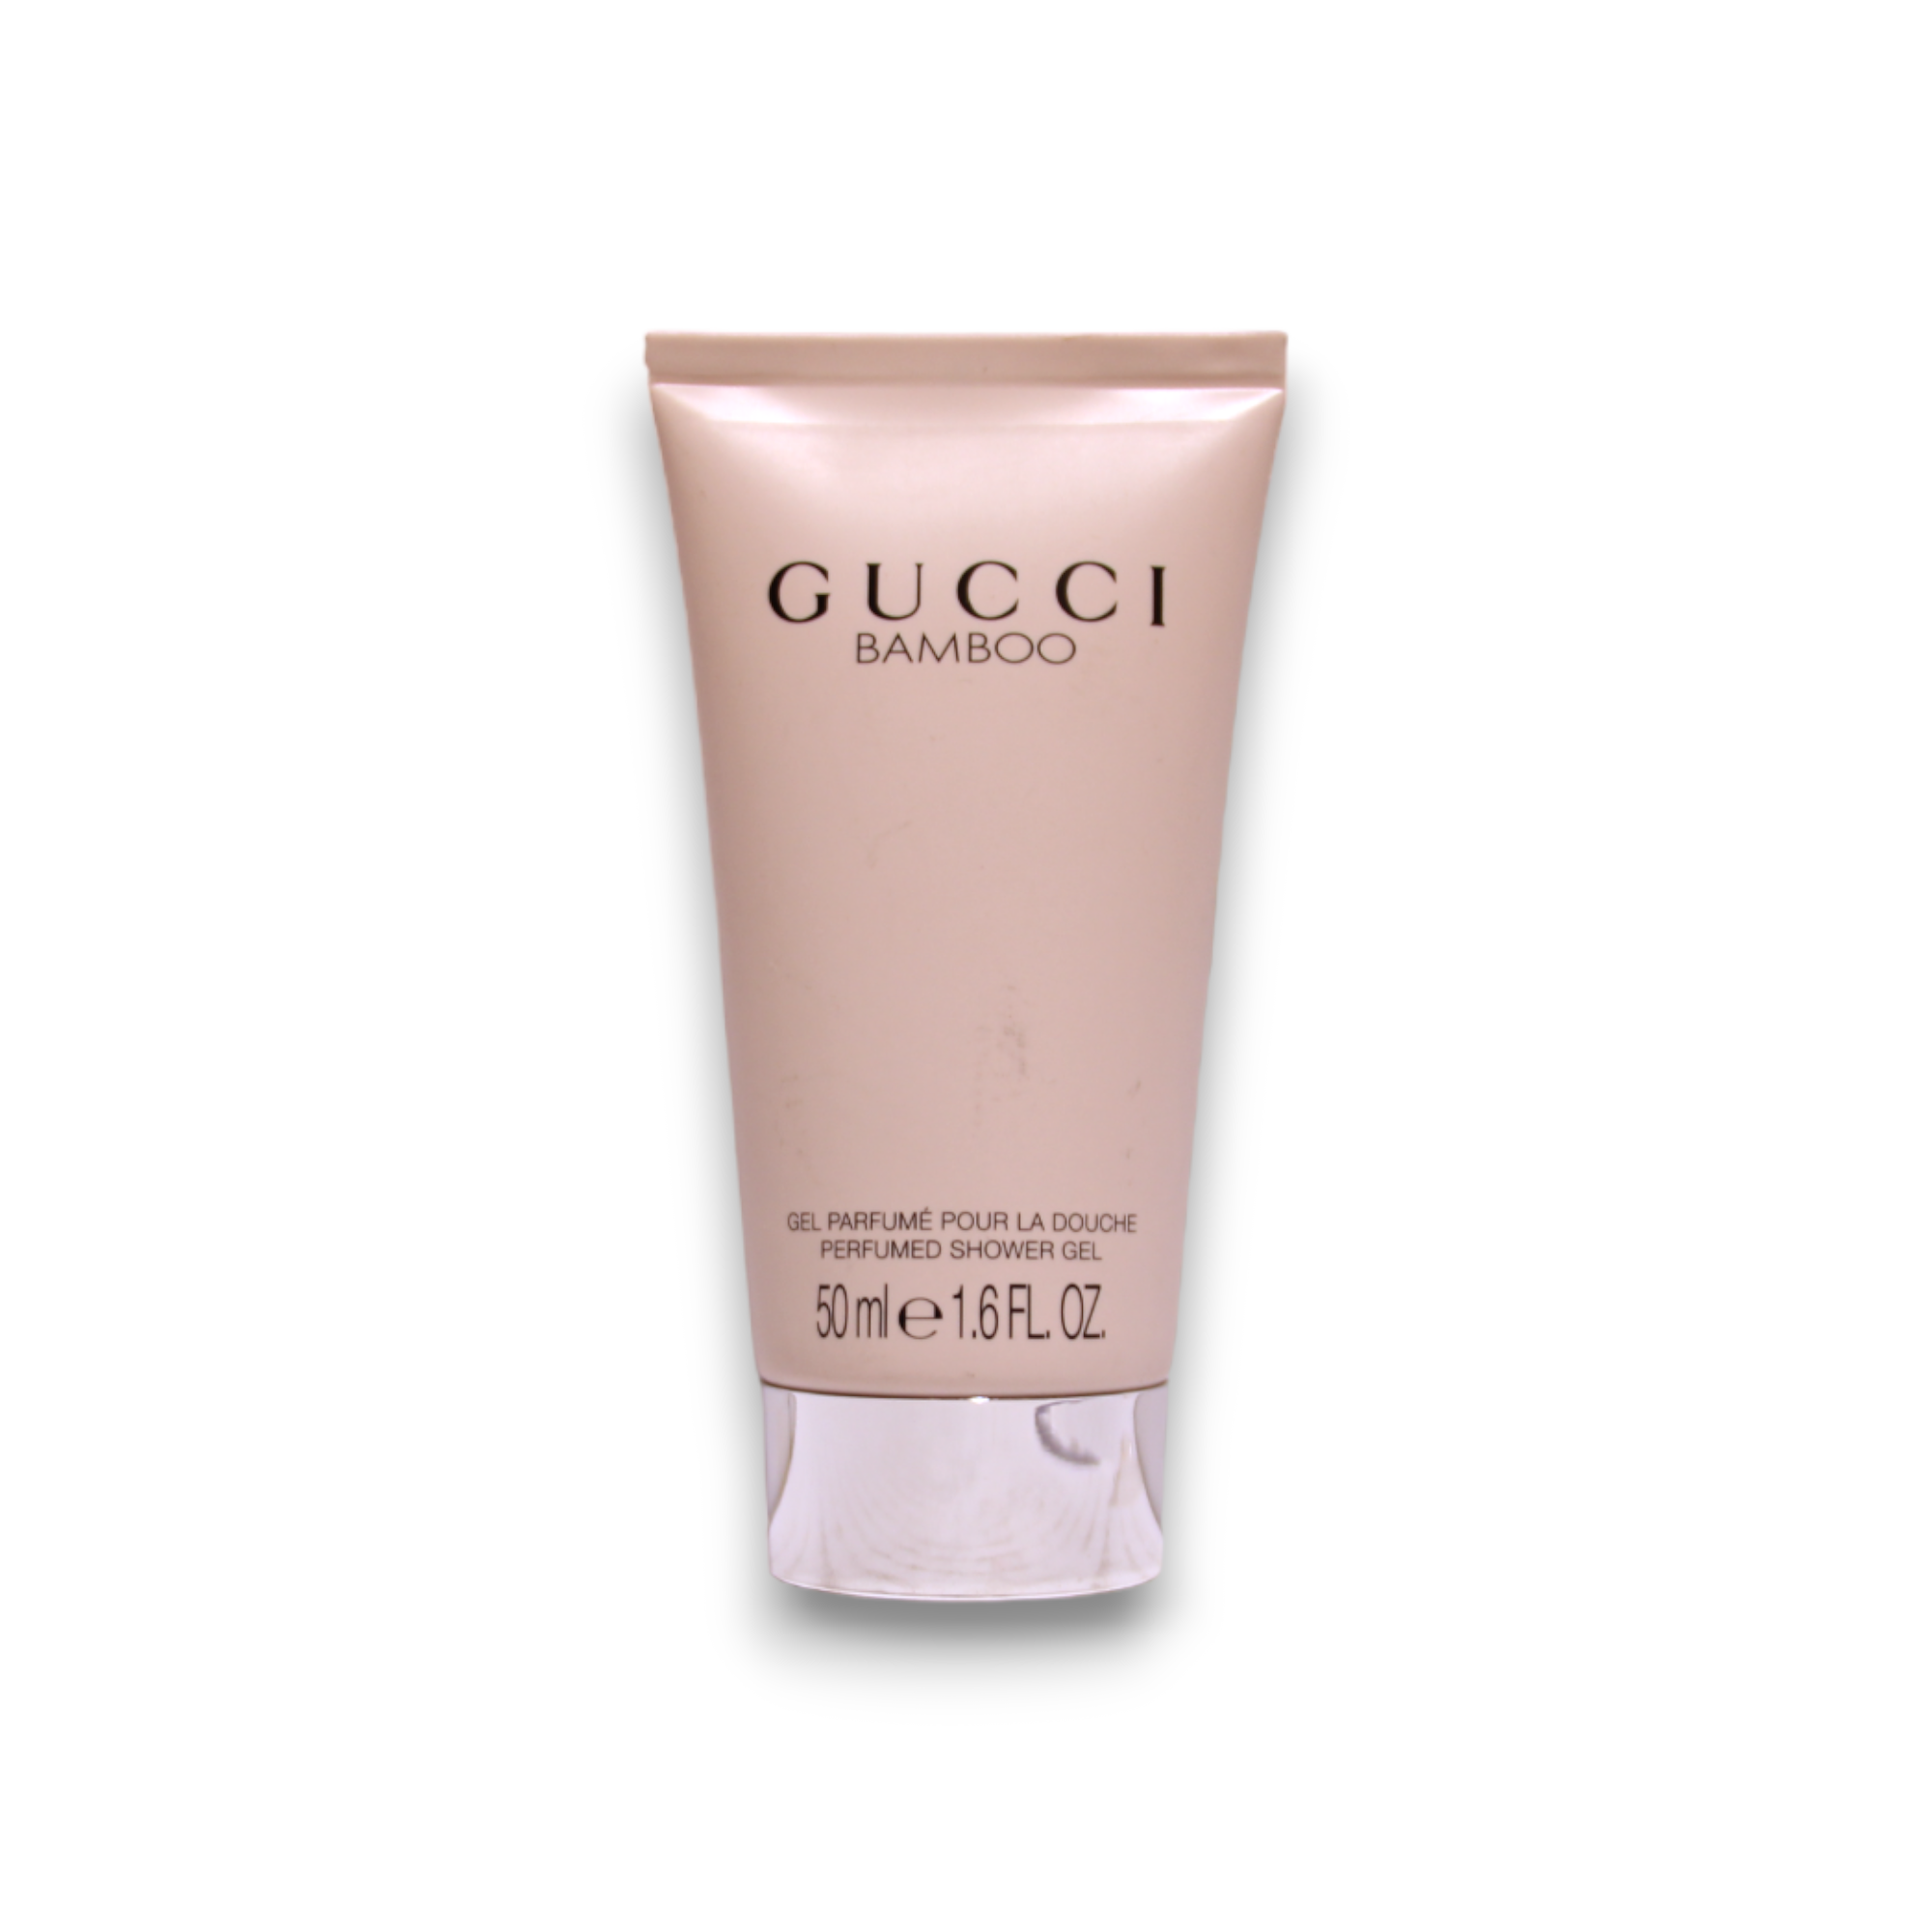 Gucci, Bamboo, Hydrating, Shower Gel, All Over The Body, 50 ml